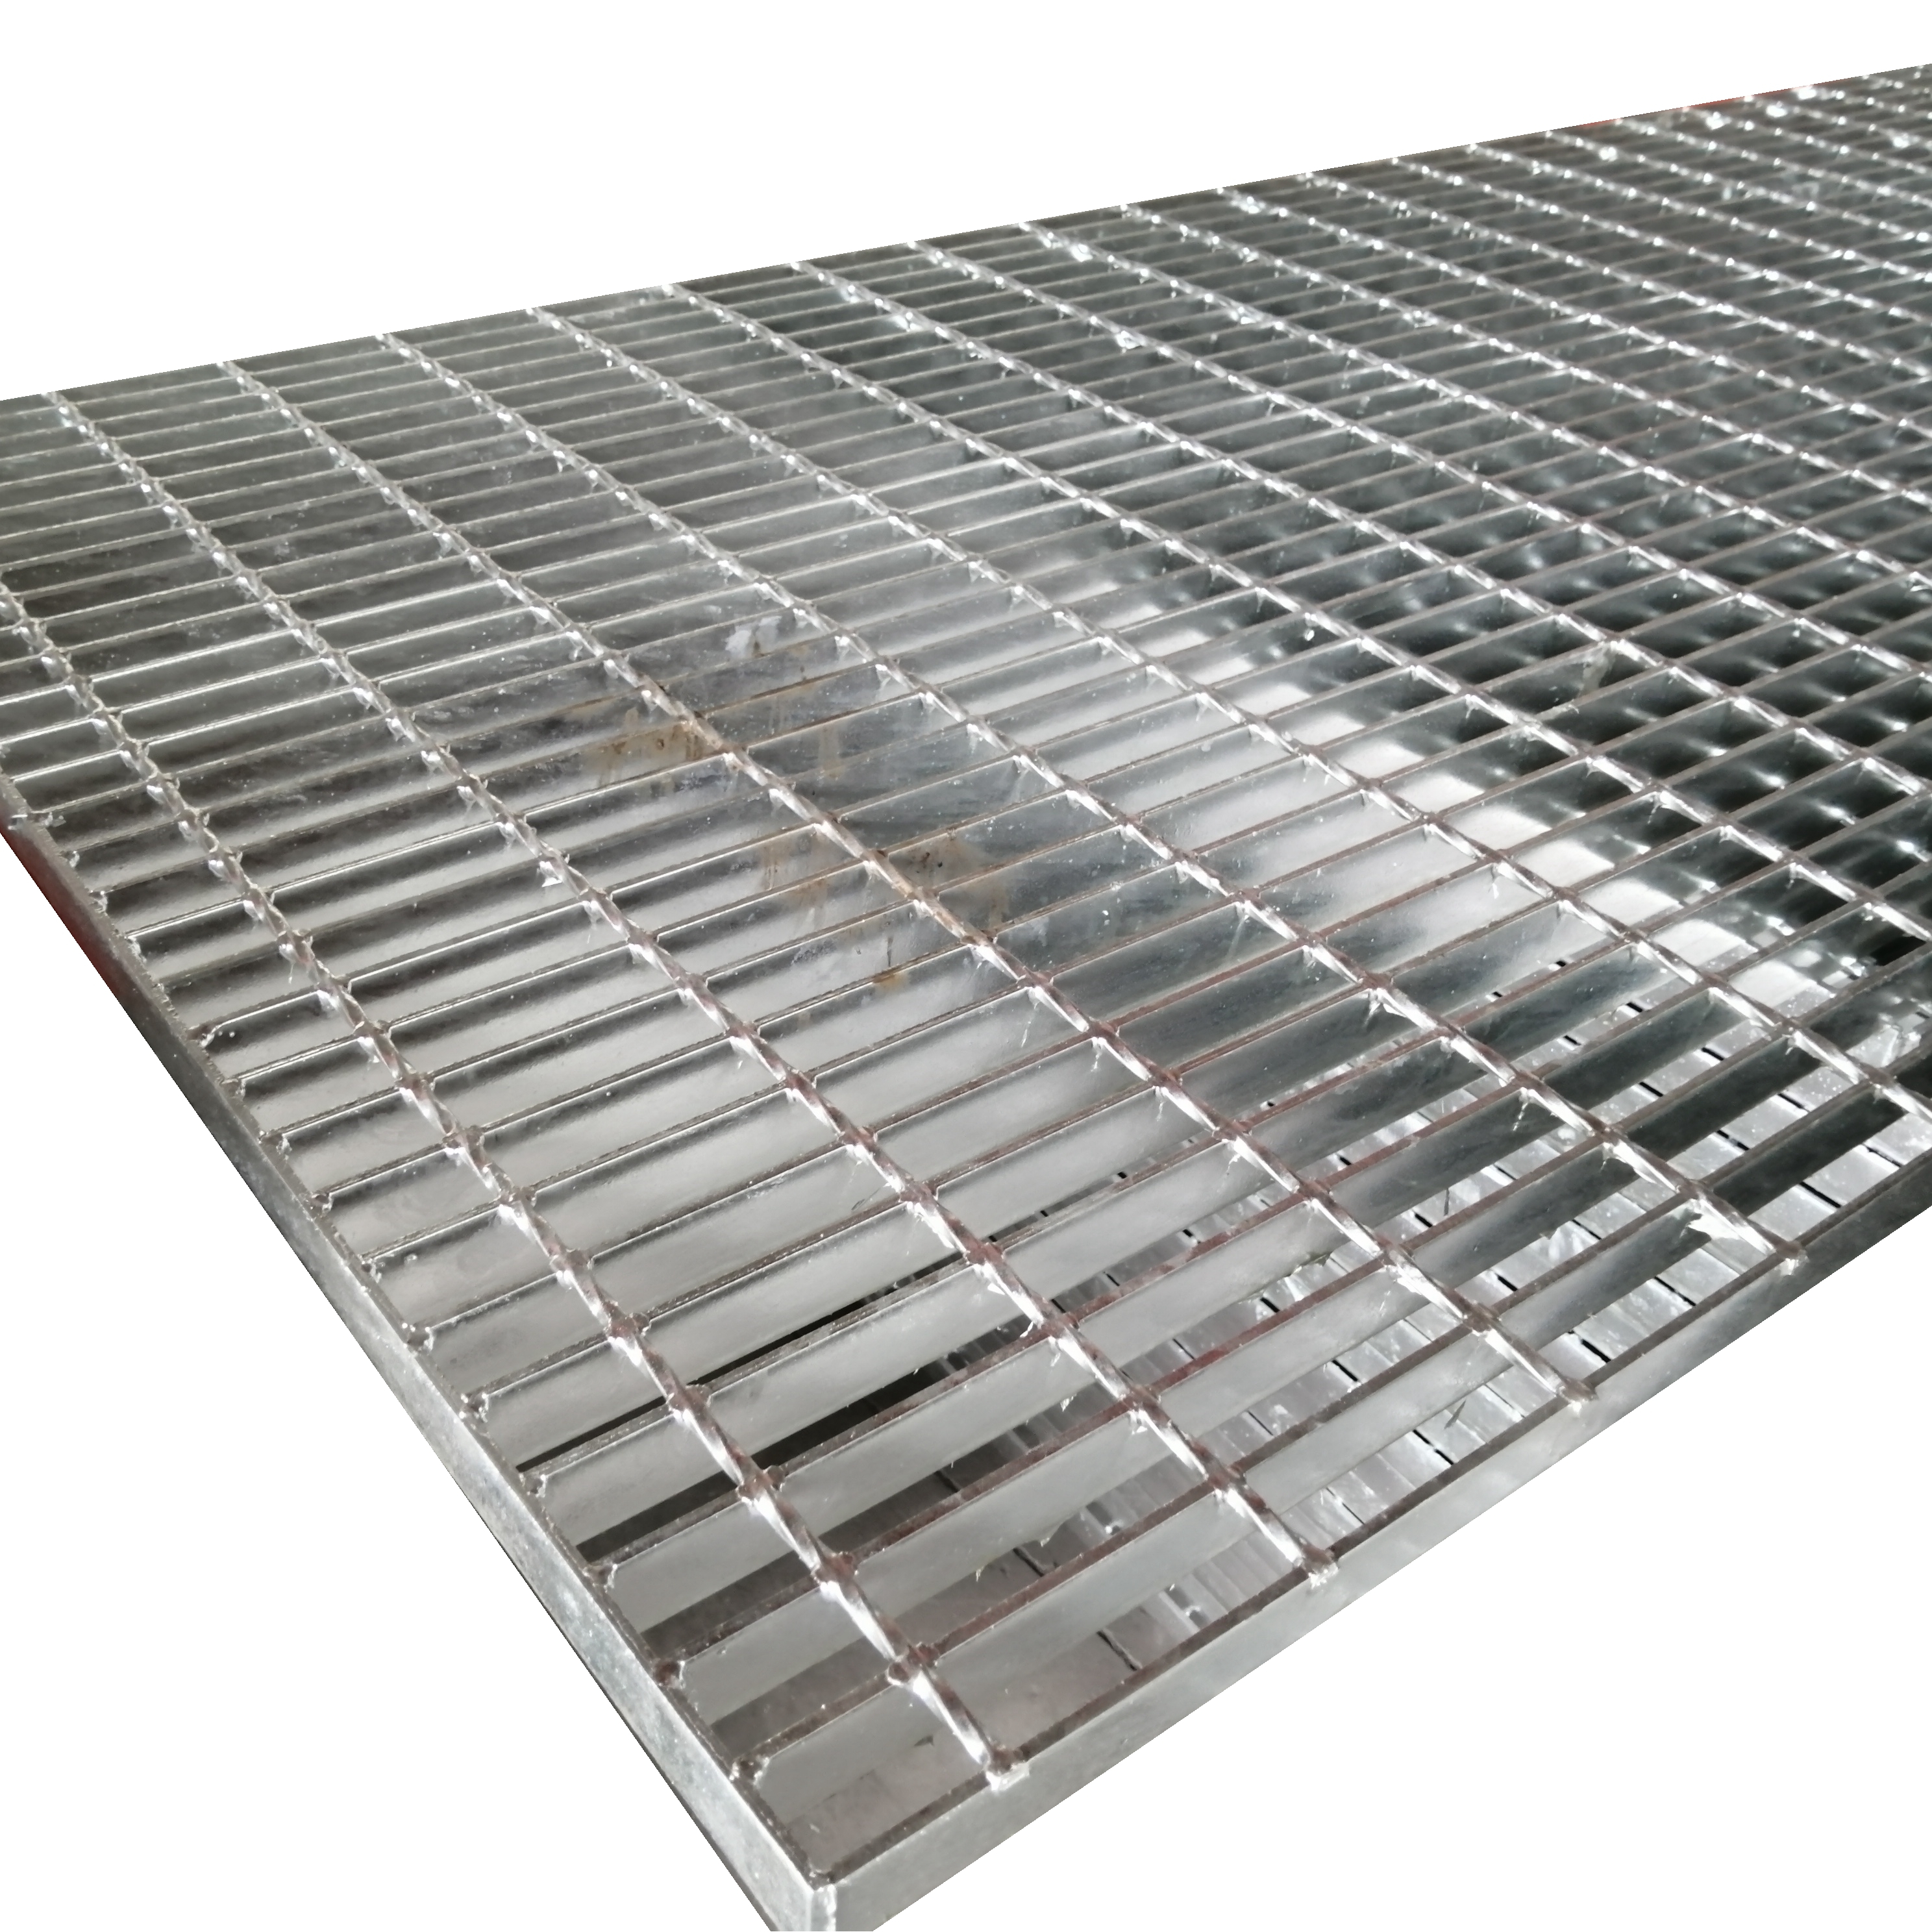 drainage channel stainless steel grating a325msg serrated steel grating – buy serrated steel grating